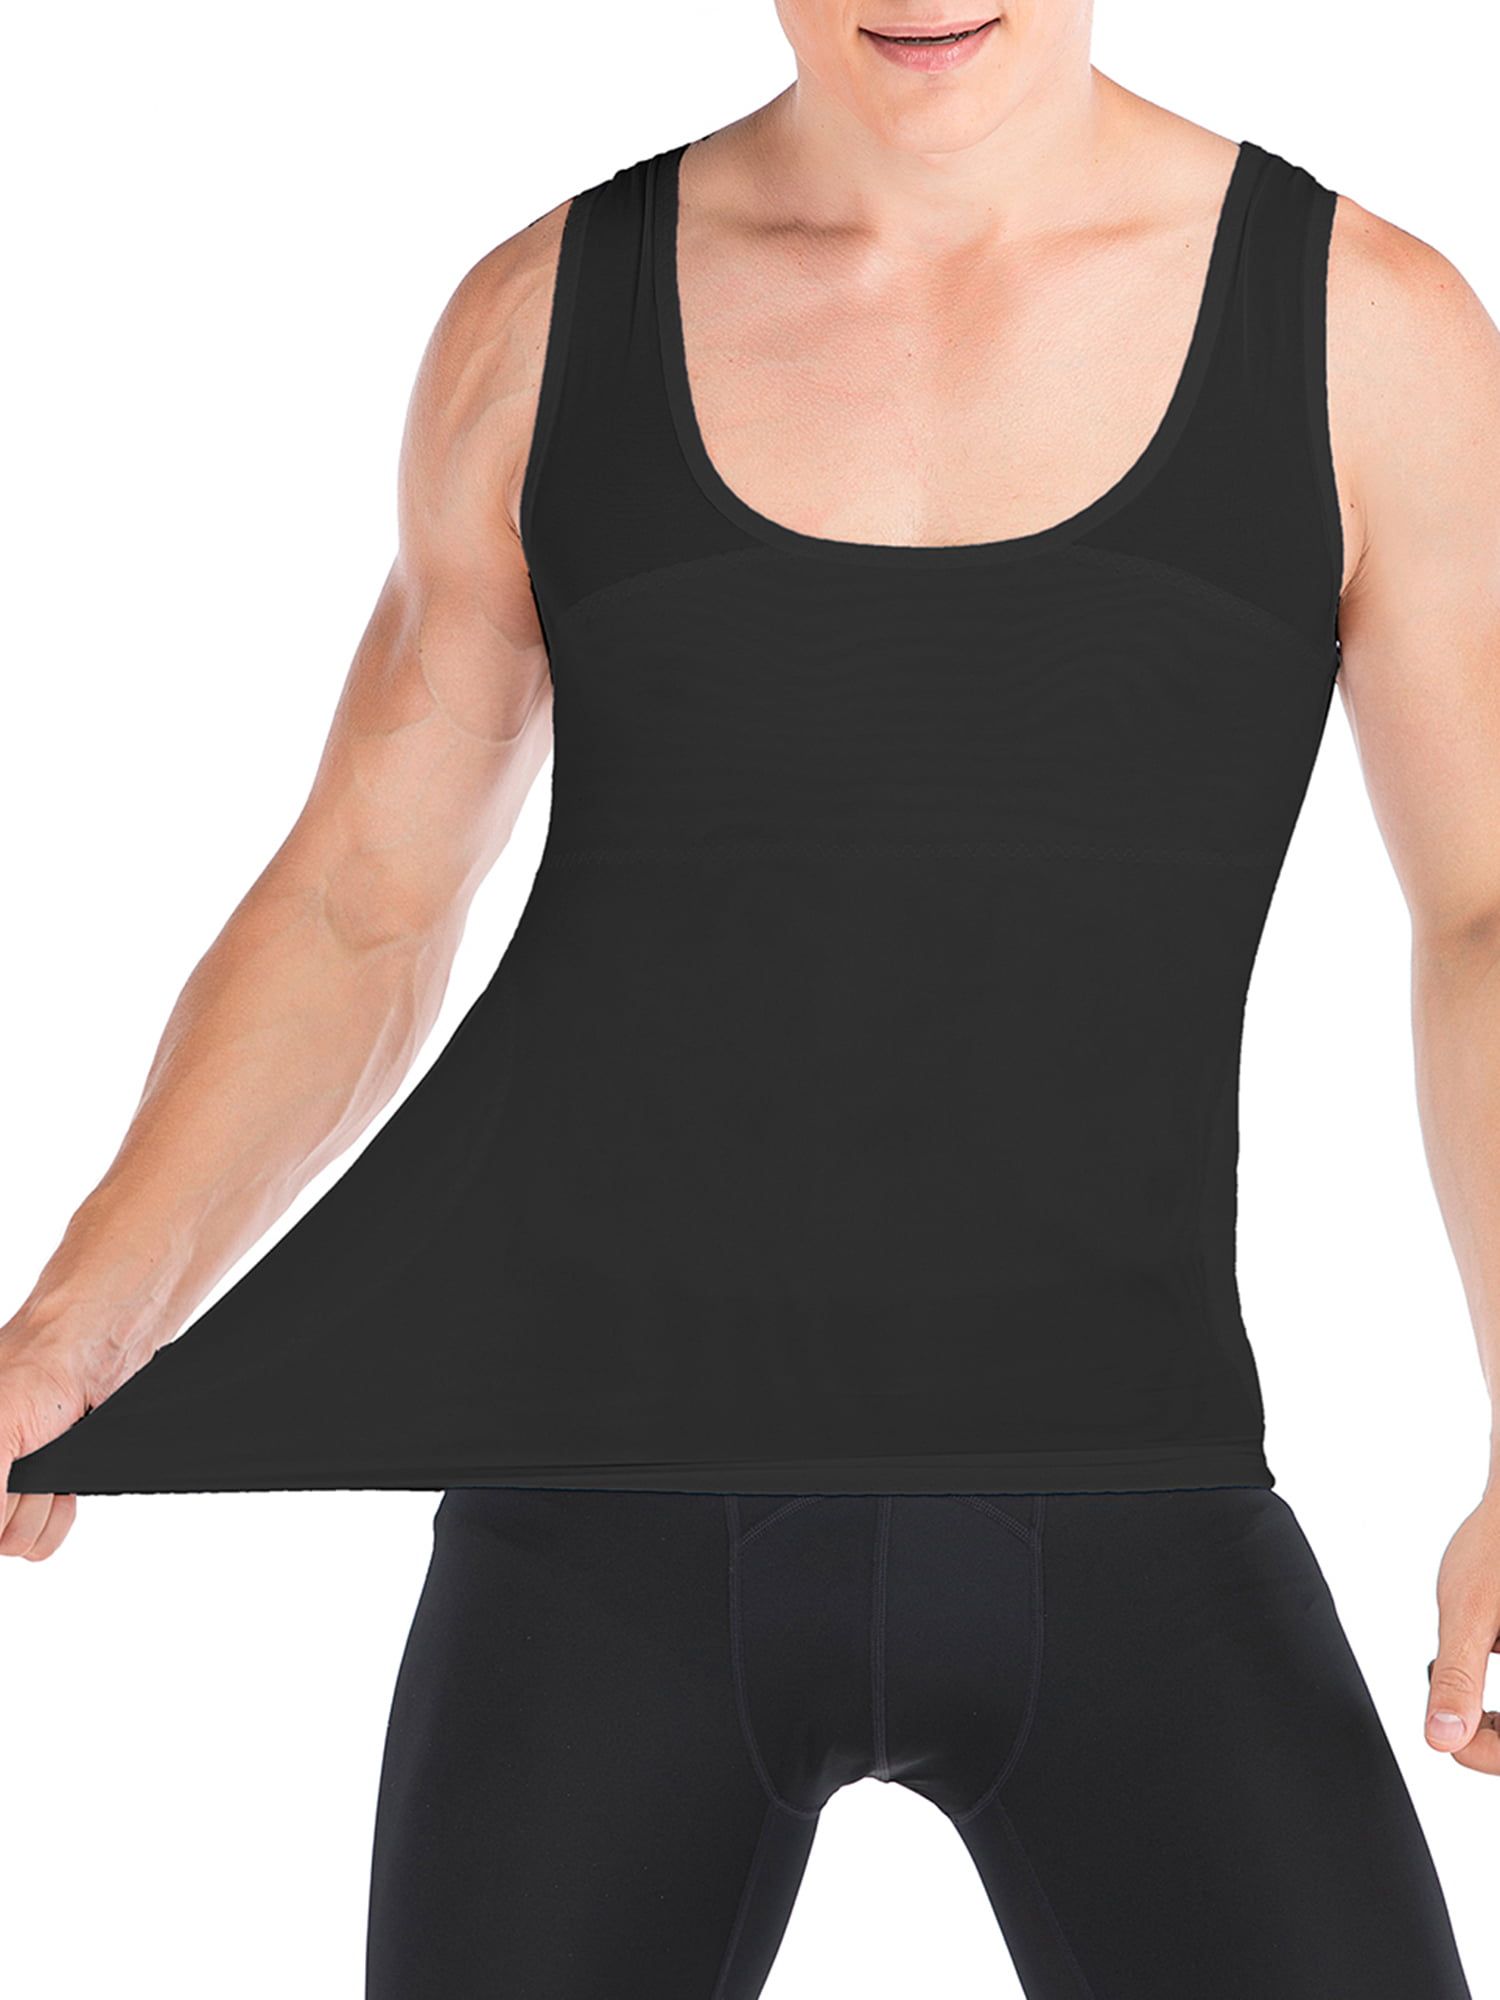 Mens Tank Tops and Body Shaper Slimming Vest Compression Sleeveless Muscle Gym Workout Tshirt for Men Running Slim Fit Tank Tops Stretch Short Sleeve Sportwears